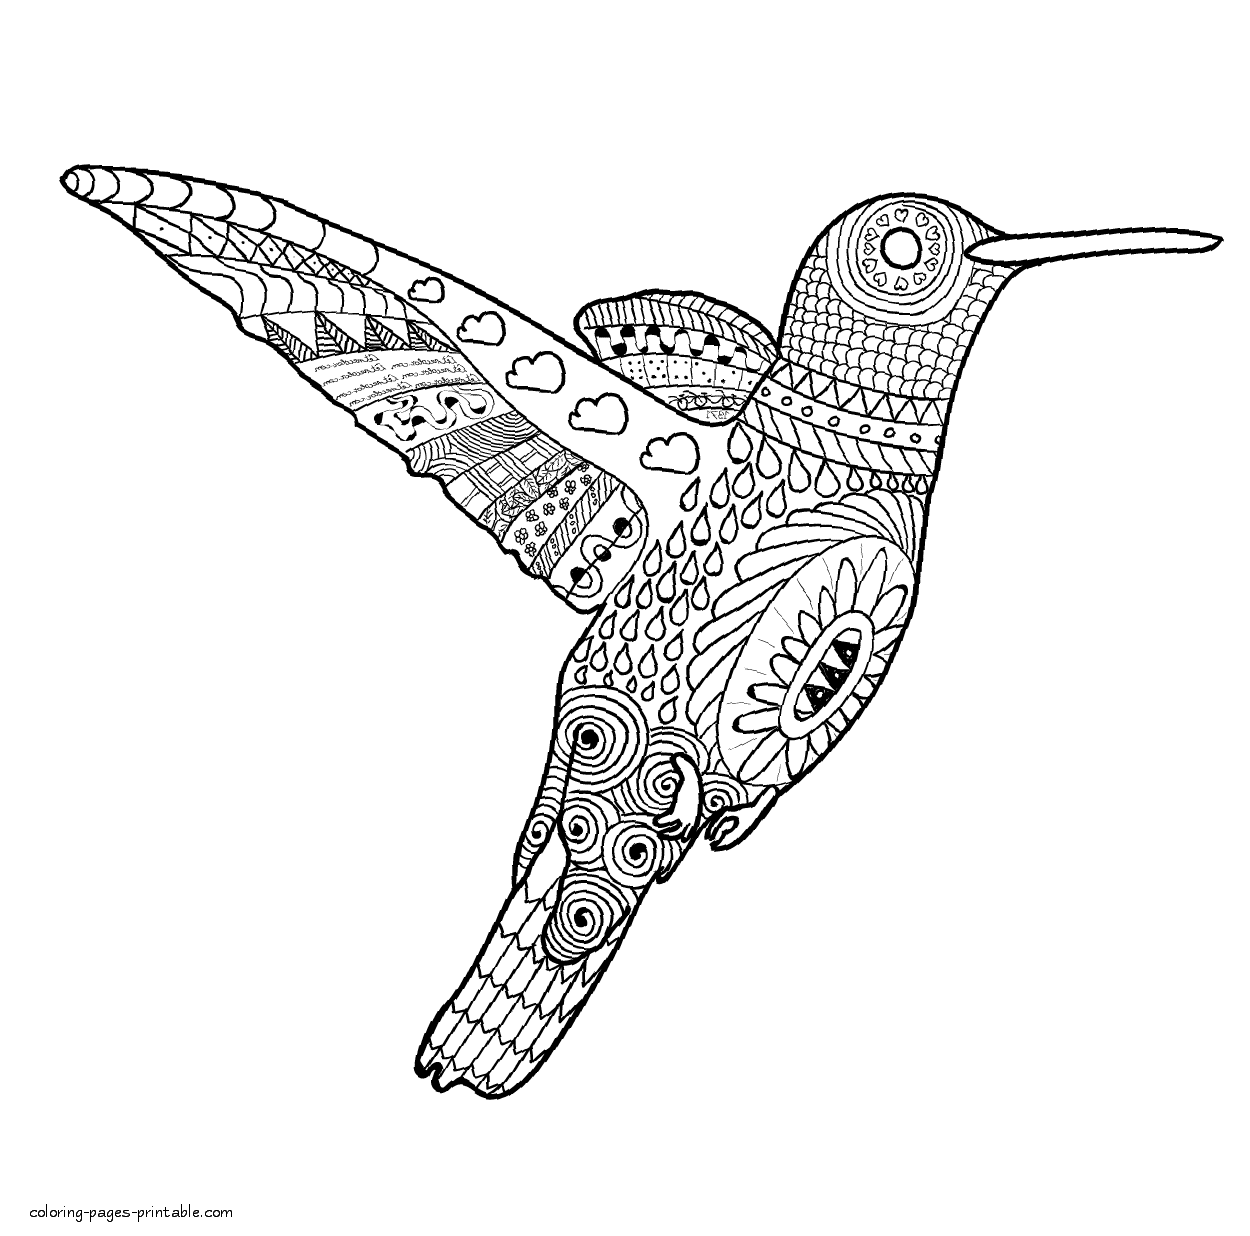 adult-coloring-pages-birds-coloring-pages-printable-com